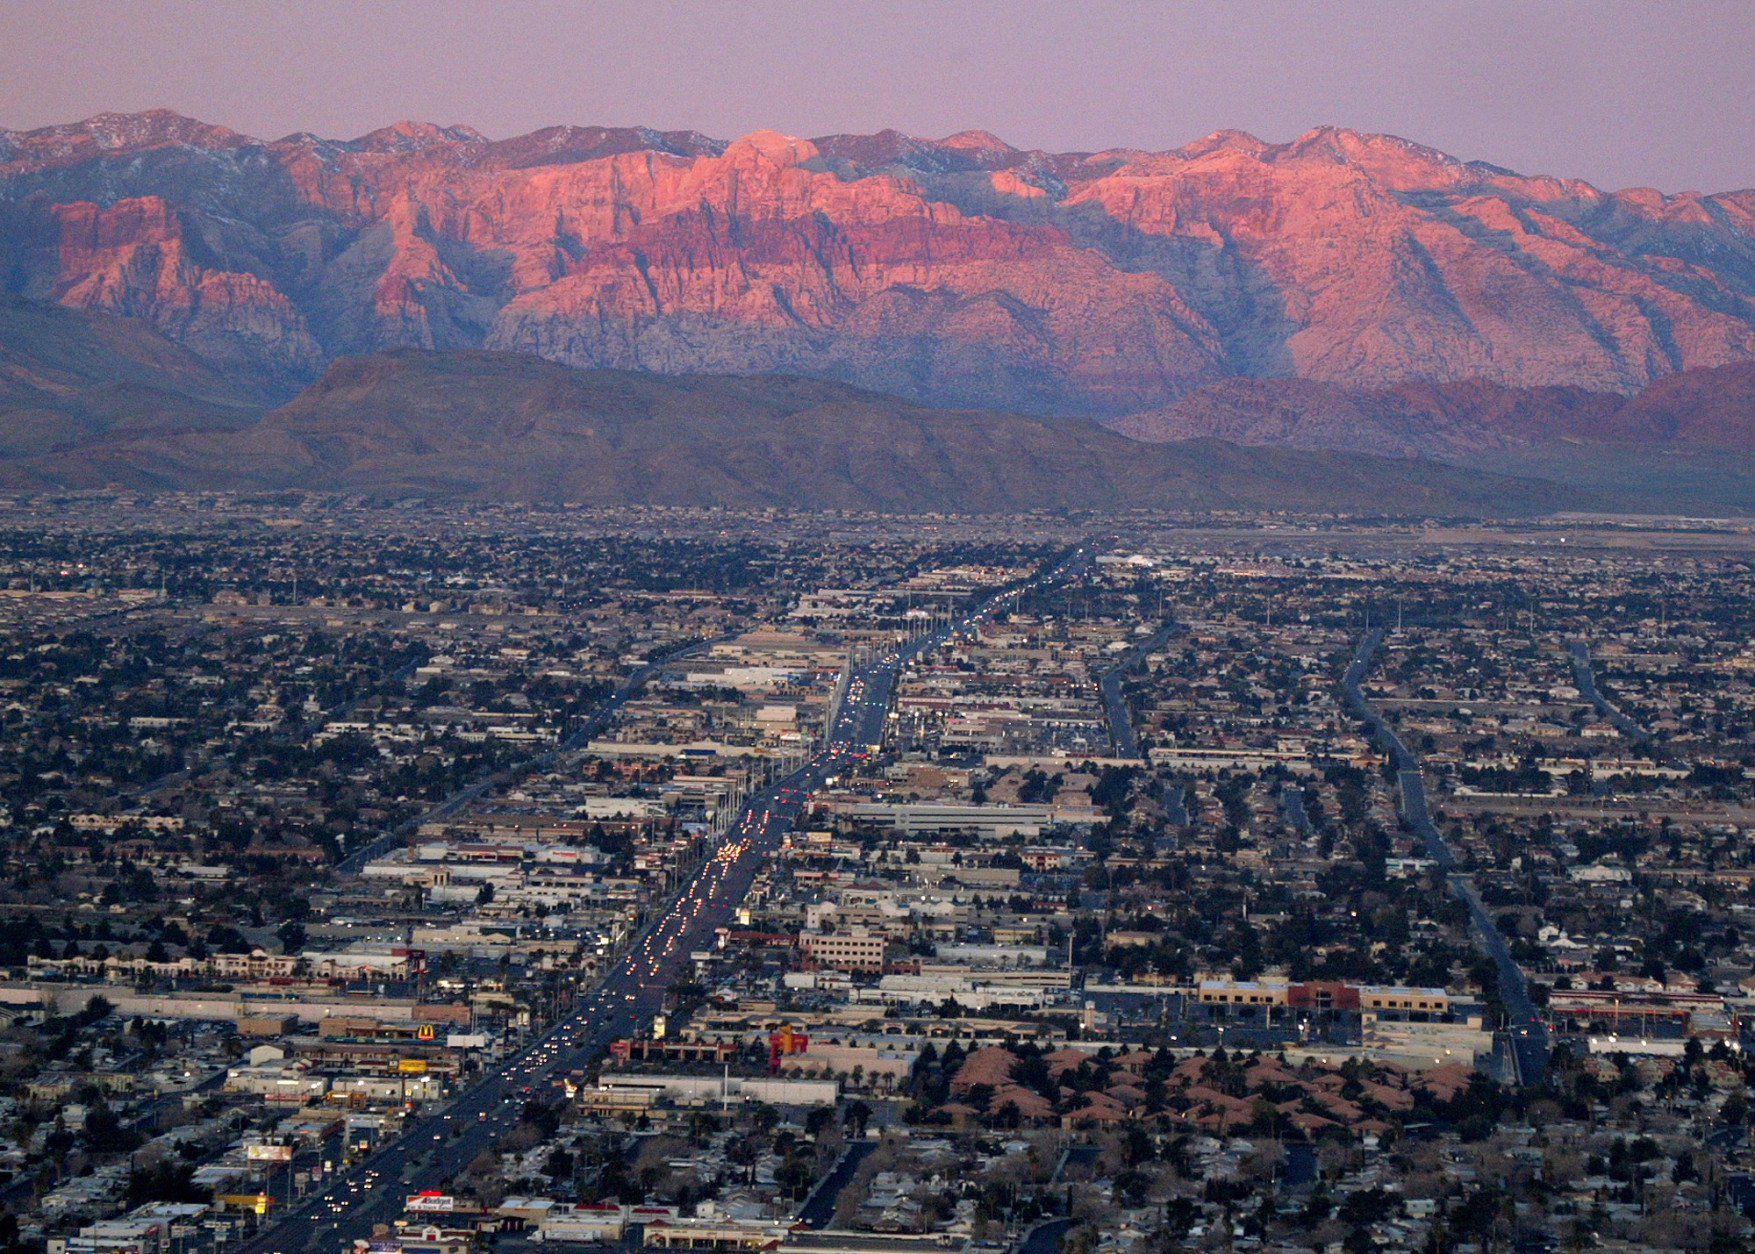 The suburbs of Las Vegas are seen Wednesday, Feb 9, 2005, from atop the Stratosphere tower looking west down Sahara Ave. towards the Spring Mountains. Explosive growth and property values have made property tax reform the top issue for the recenlty convened state legislature. State officials hope to avoid a property tax revolt like Proposition 13 which rocked California in 1978. (AP Photo/Joe Cavaretta)